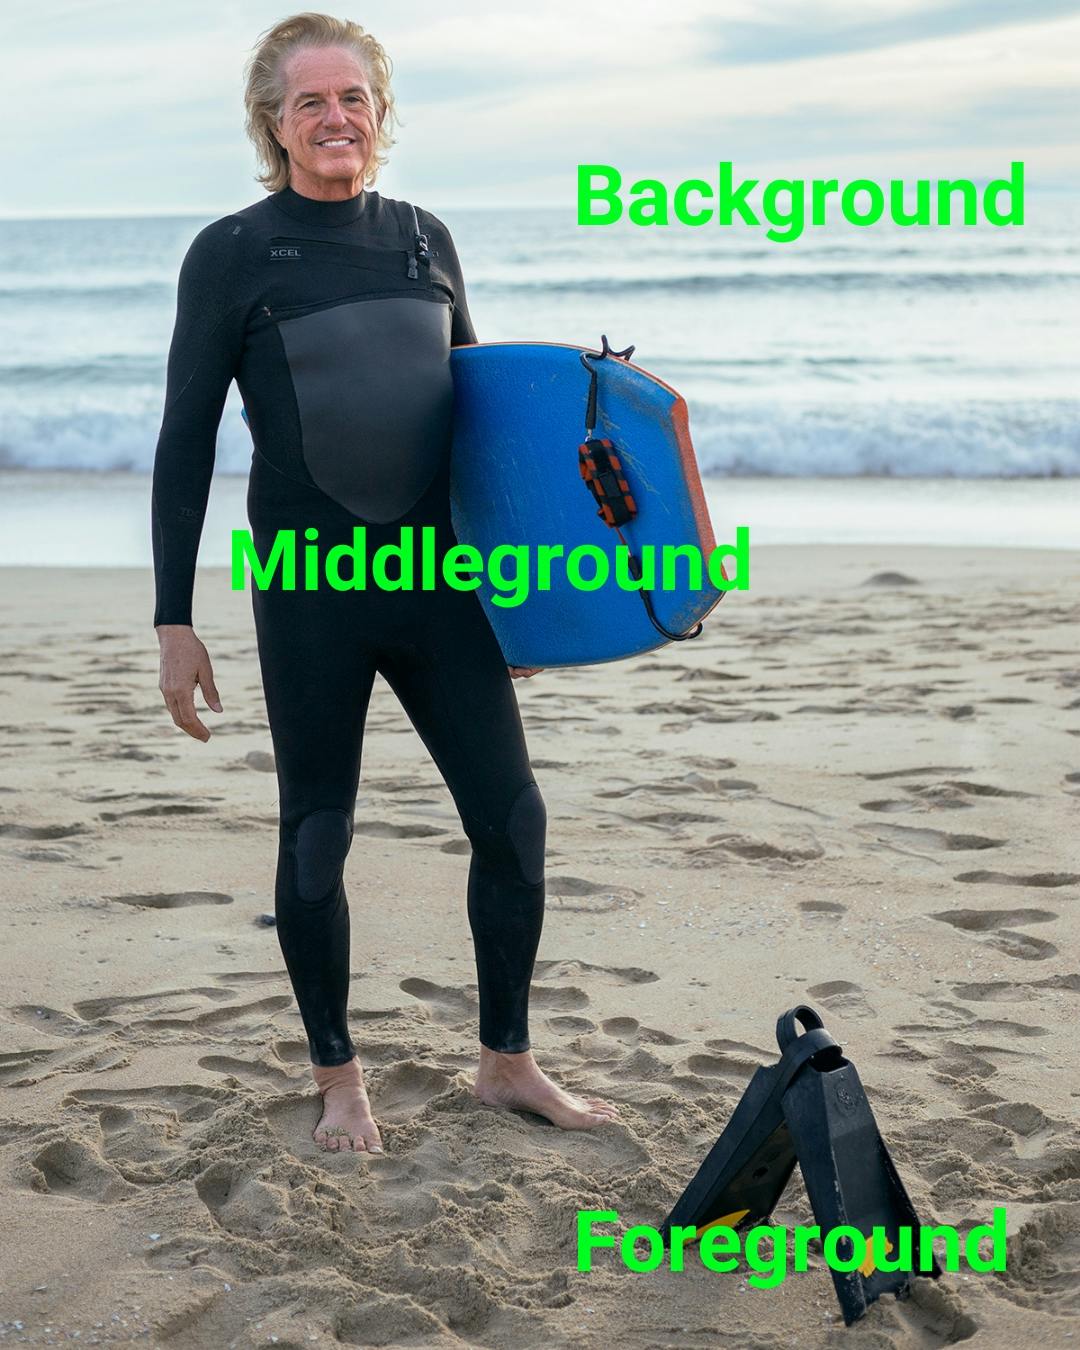 Man standing on beach with wetsuit, boogie board, and fins.